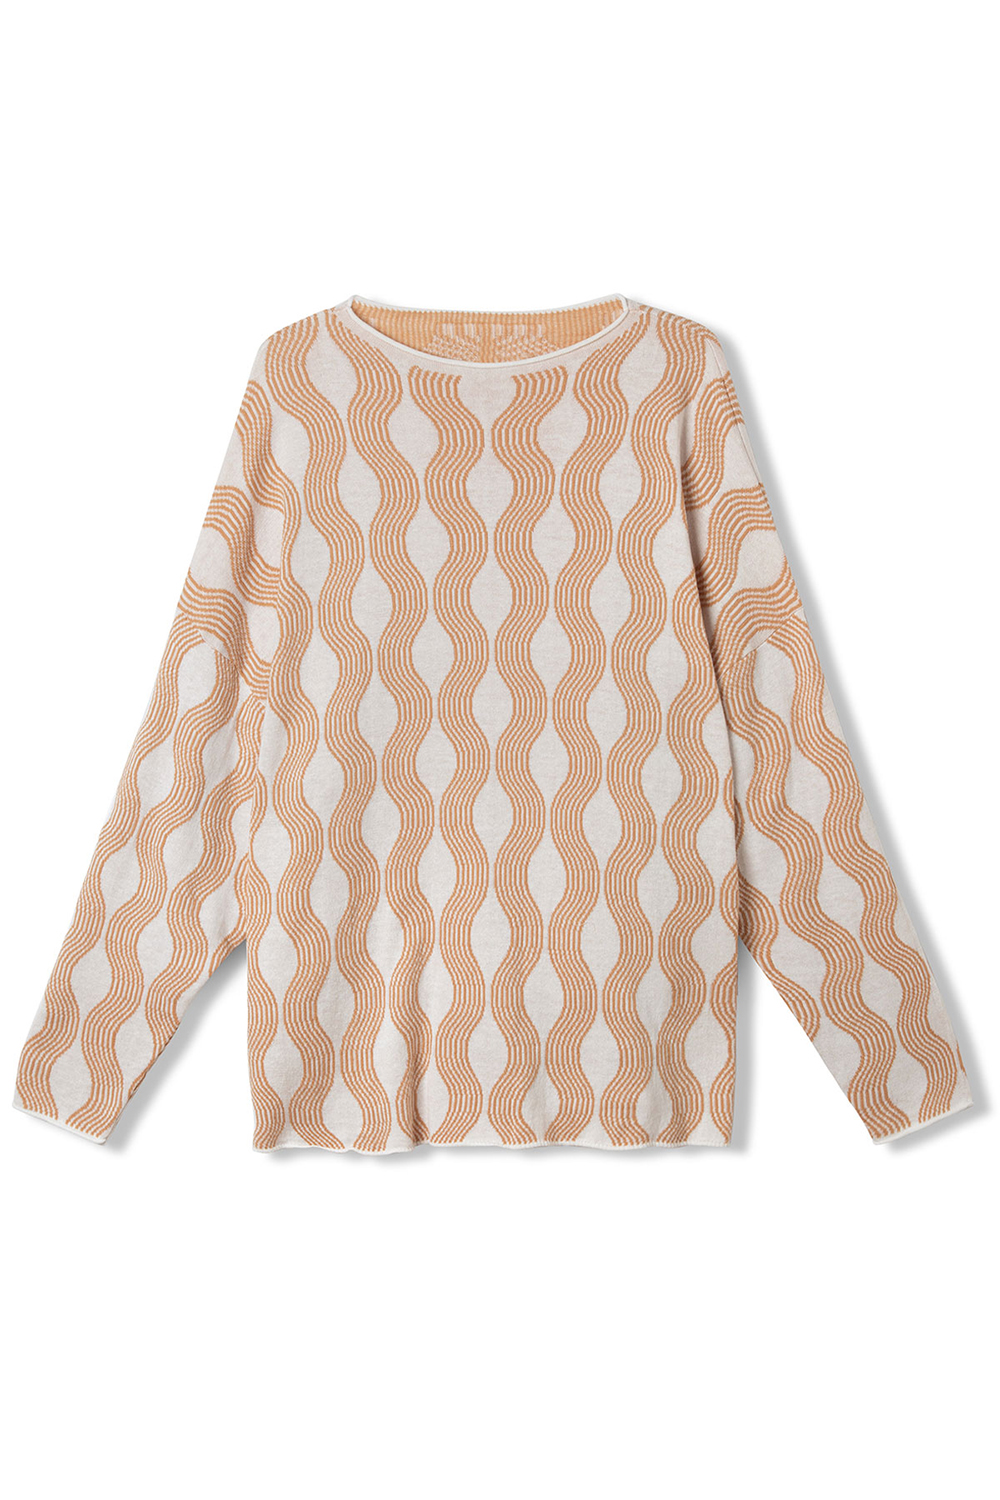 Tan Wave Knitted Cotton Top